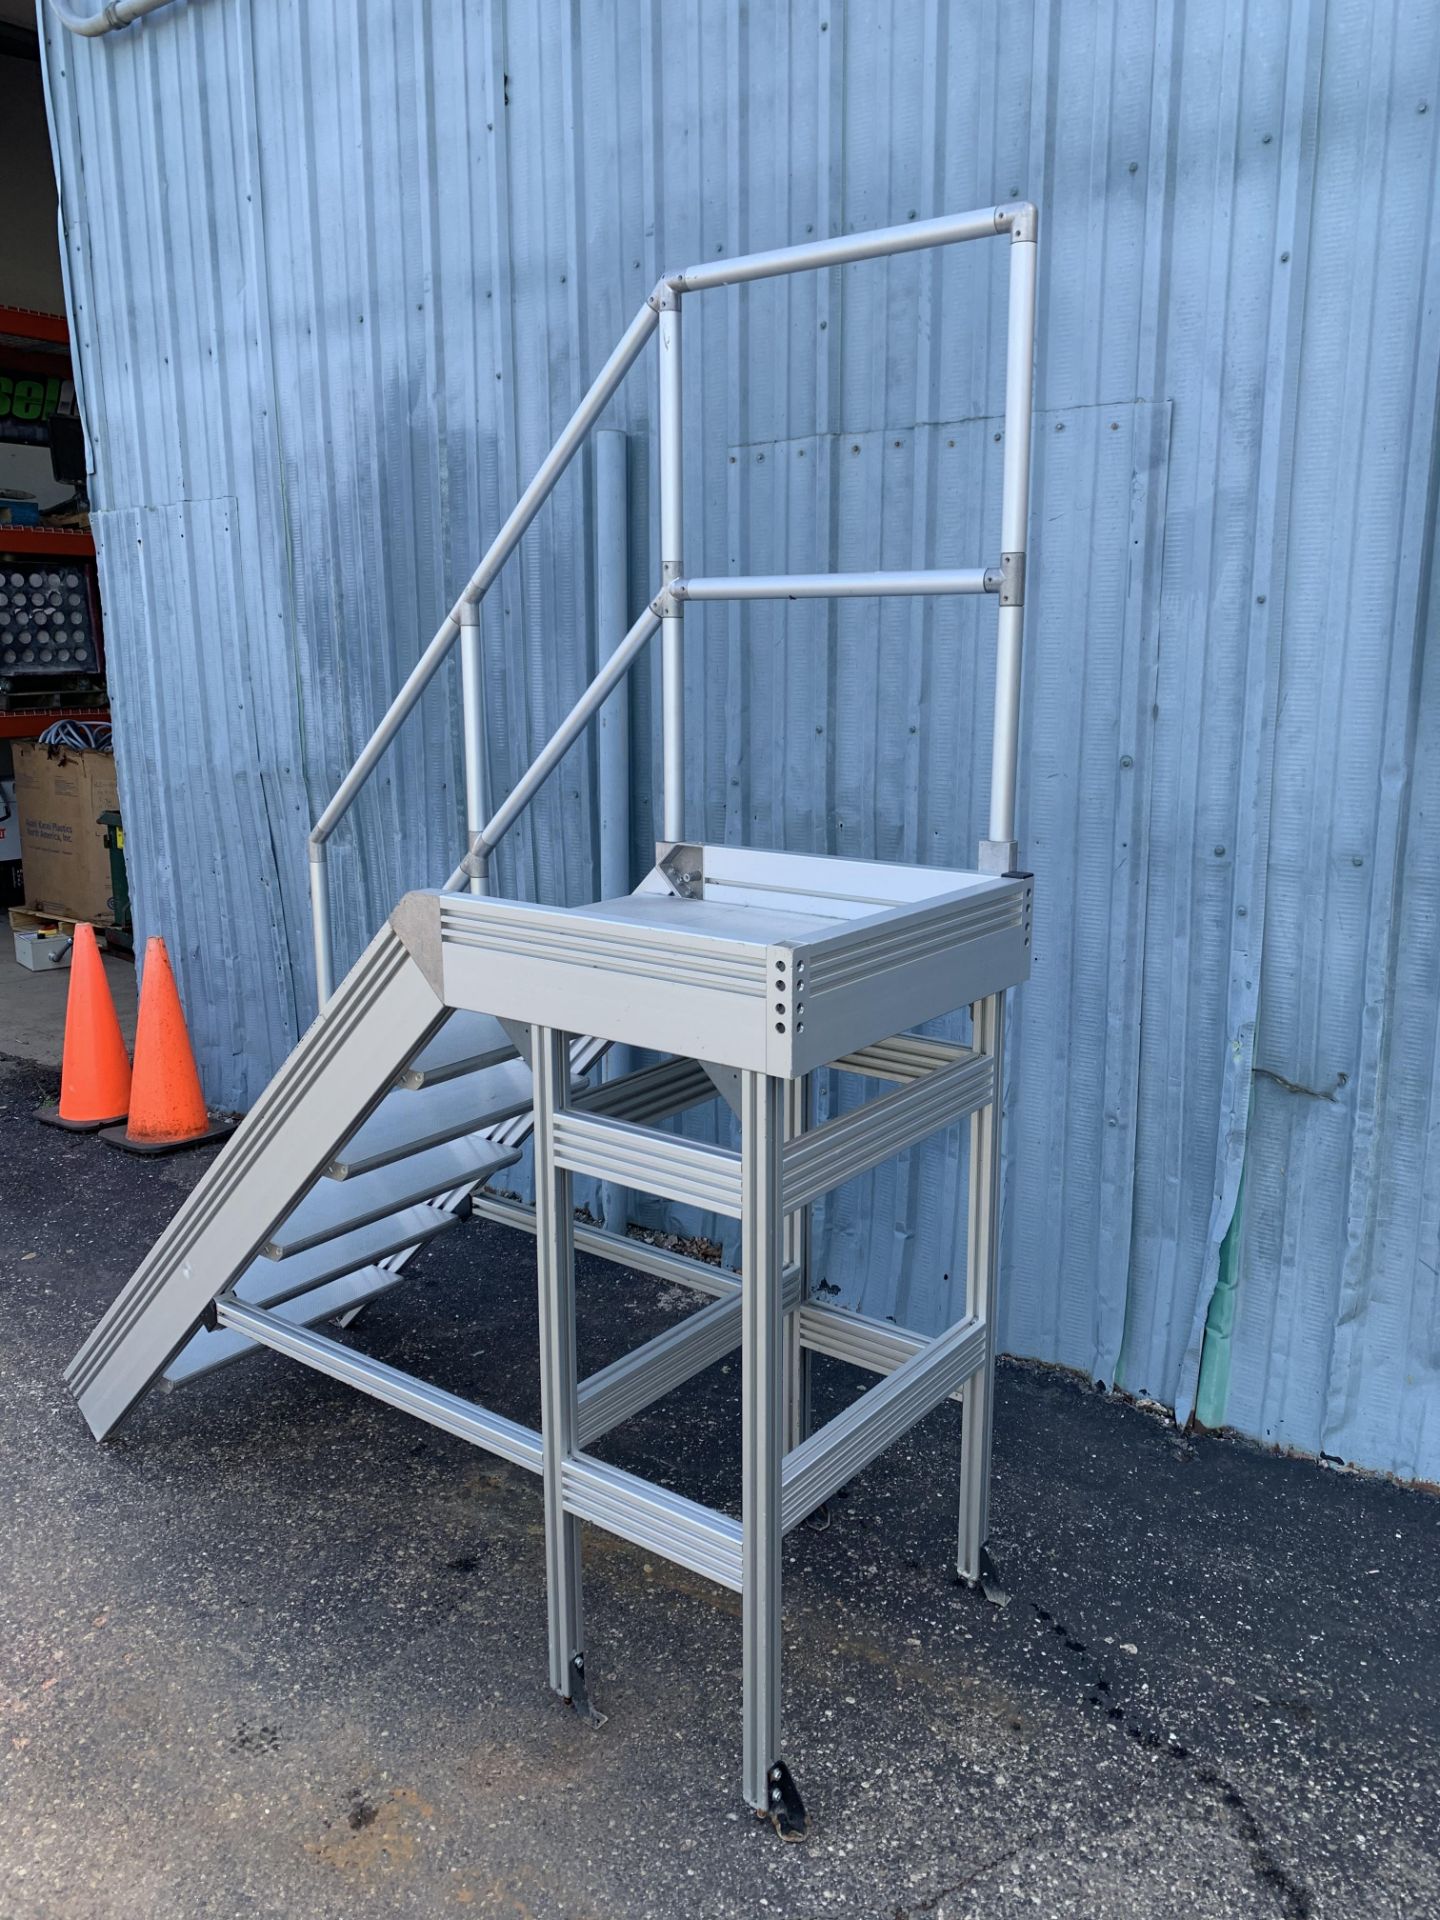 UNKNOWN BRAND ALUMINUM STAIRS WITH RAIL, 6-STEPS, TOP PLATFORM STEP 50" HIGH - Image 2 of 8